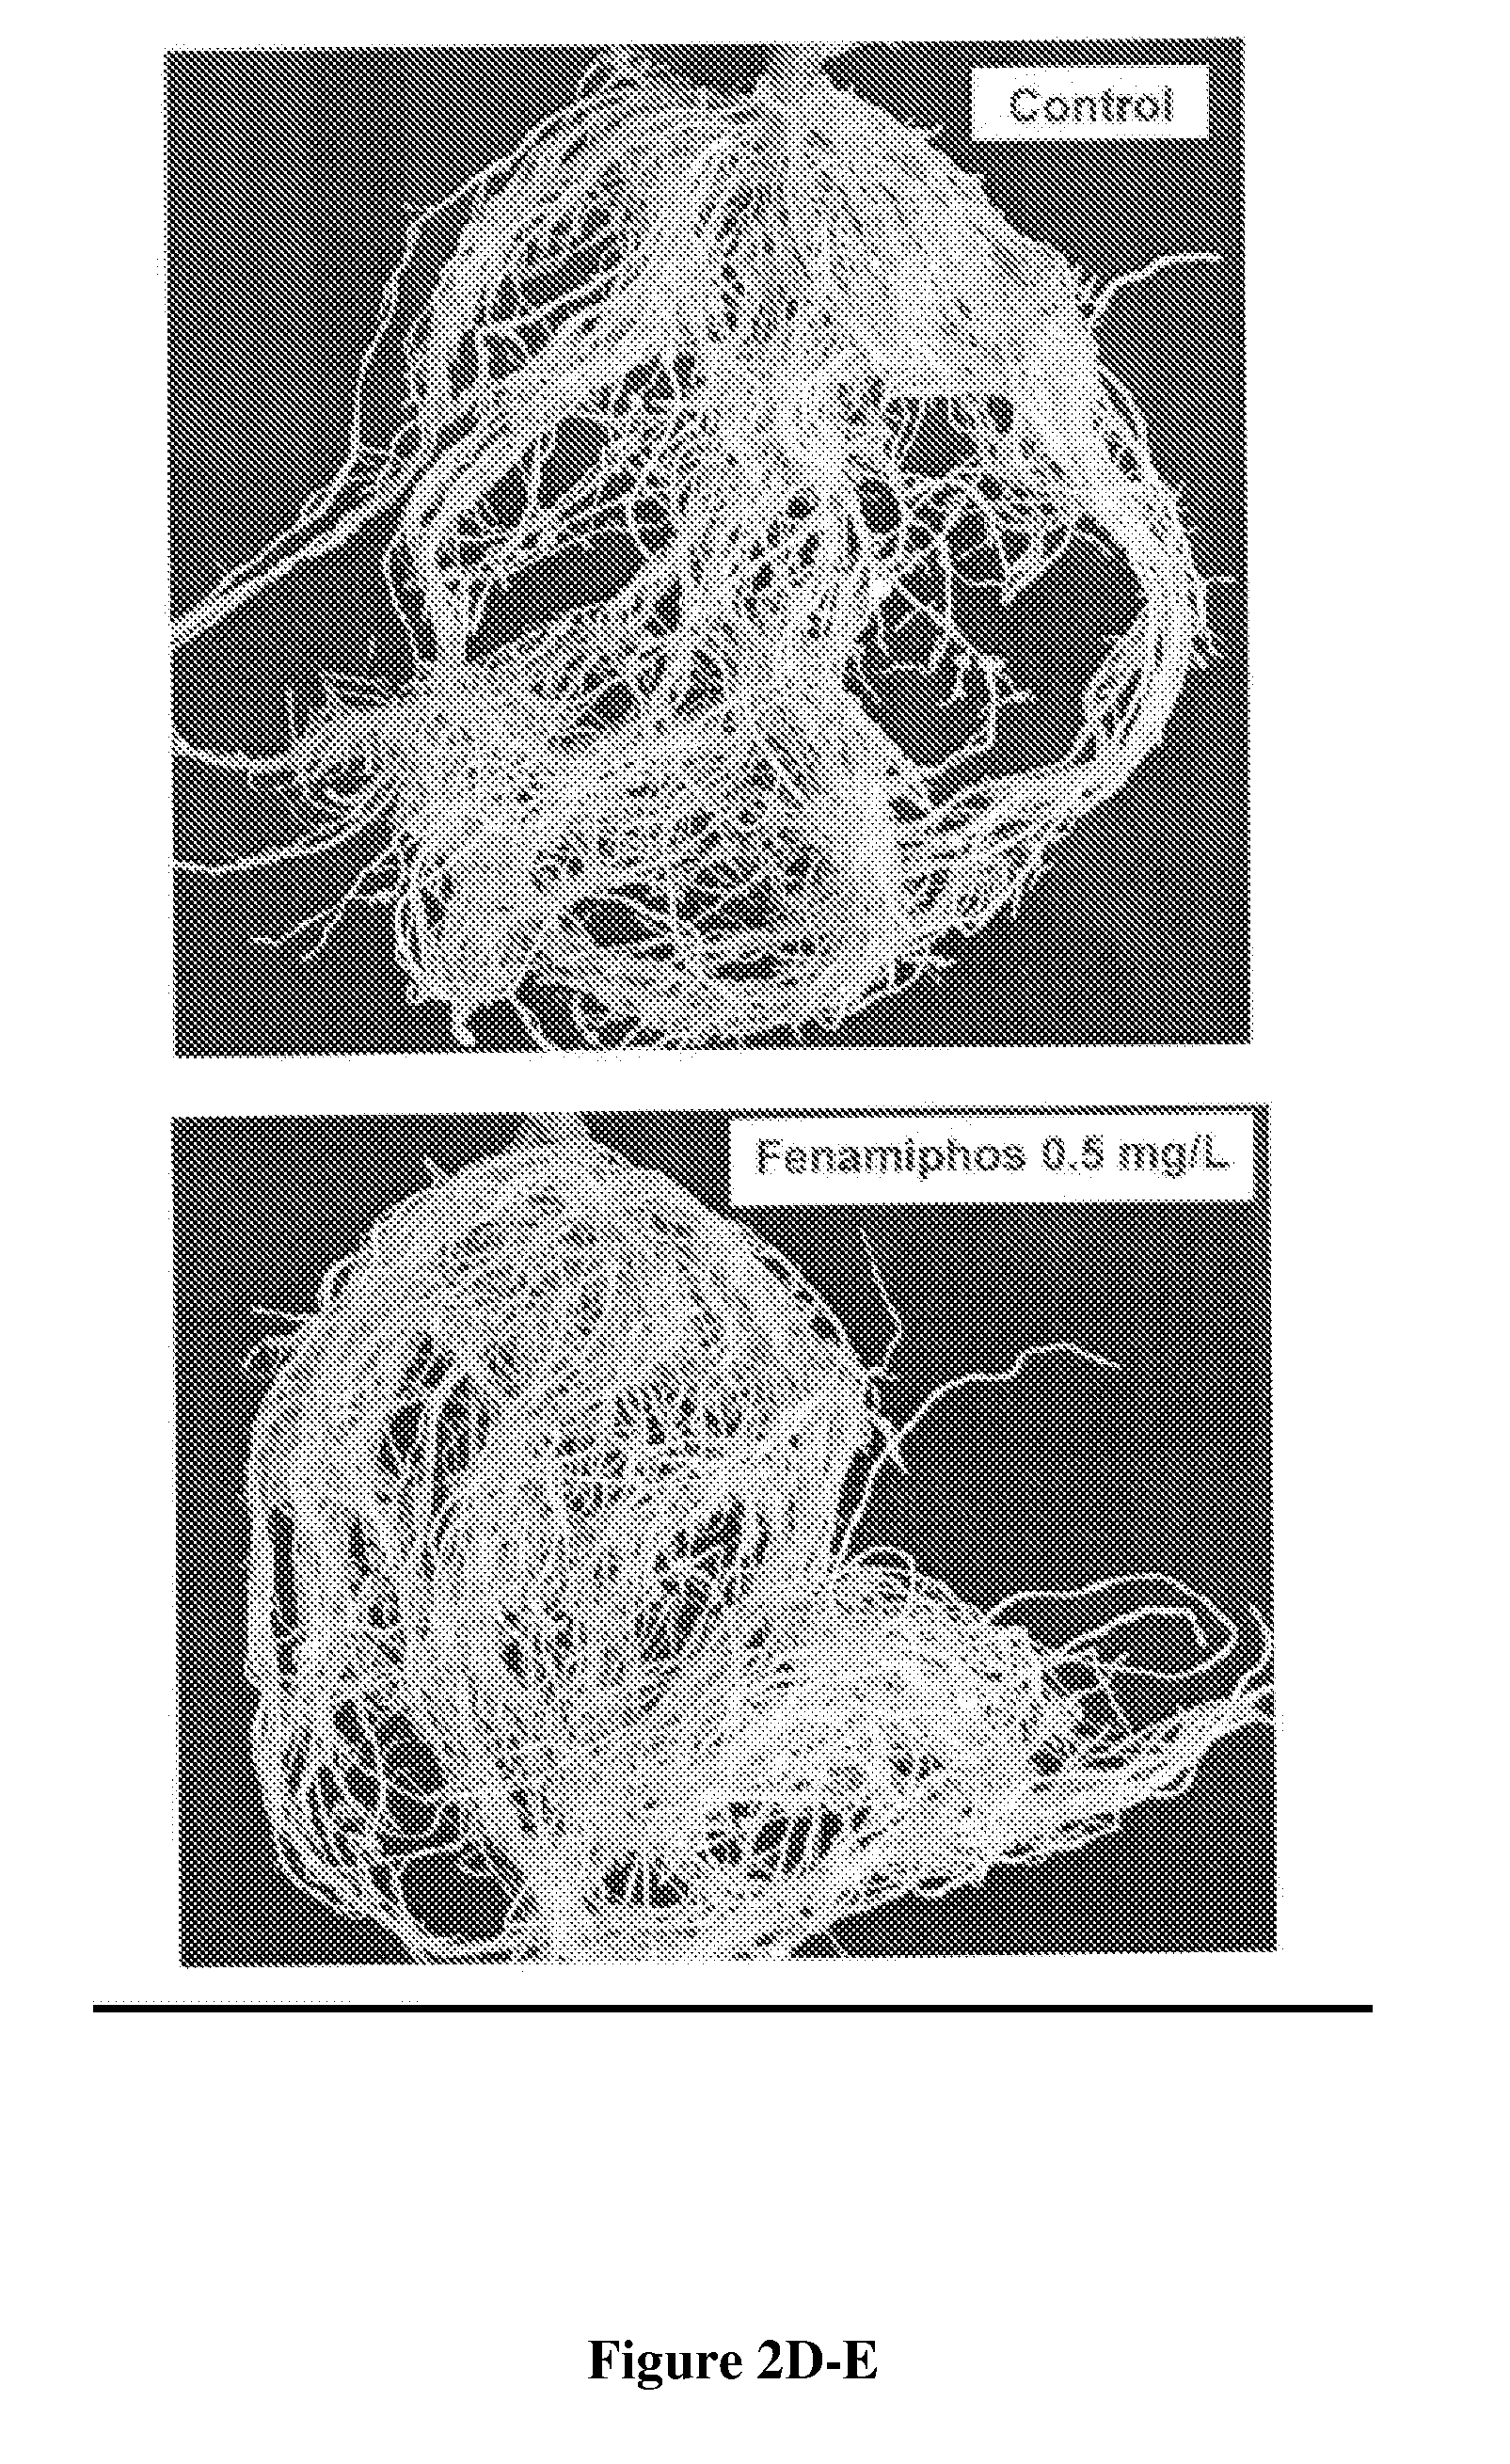 Insect and plant disease control compositions and methods of use thereof